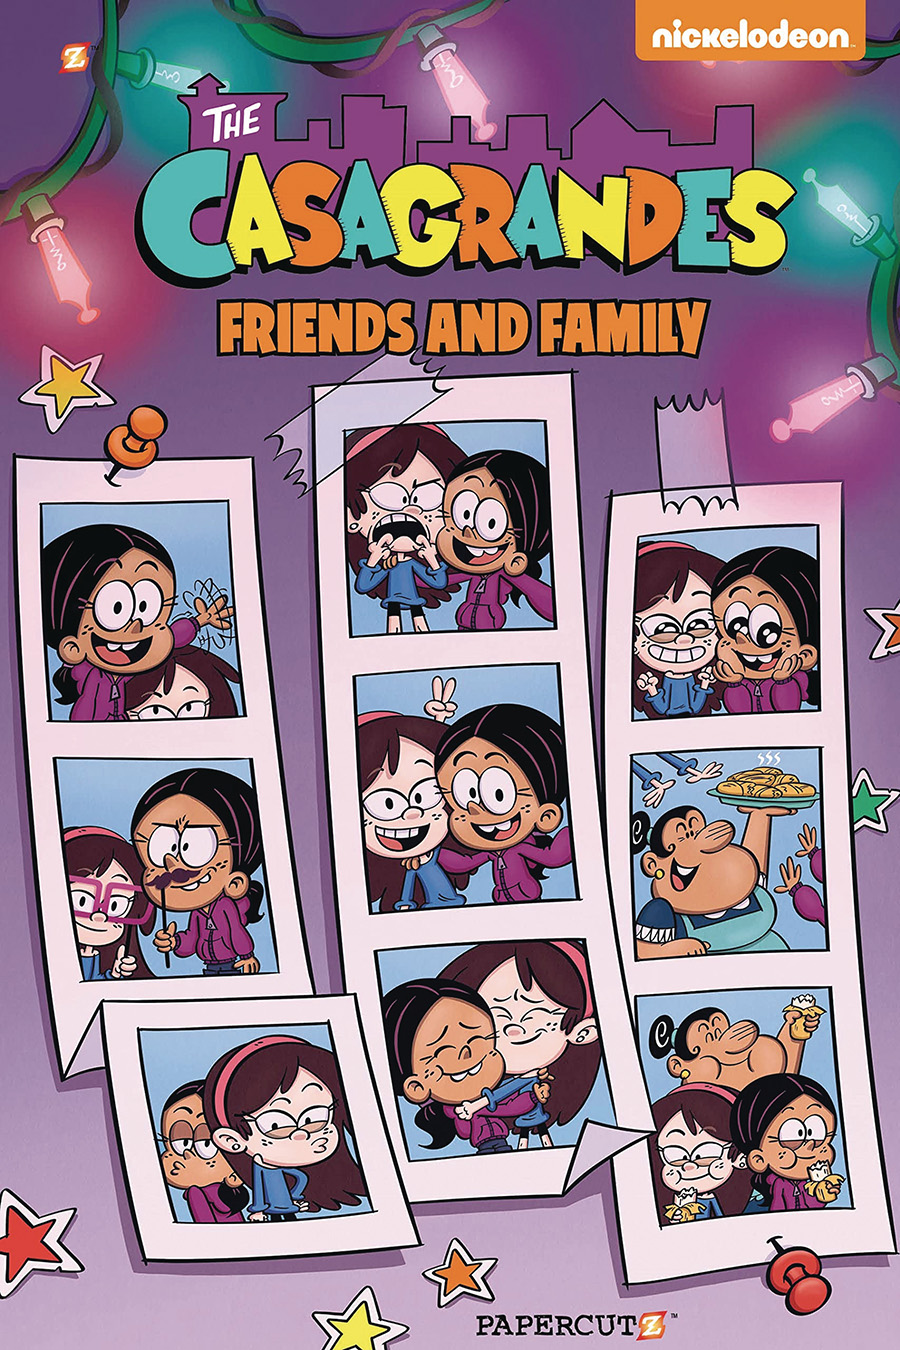 Casagrandes Vol 4 Friends And Family TP